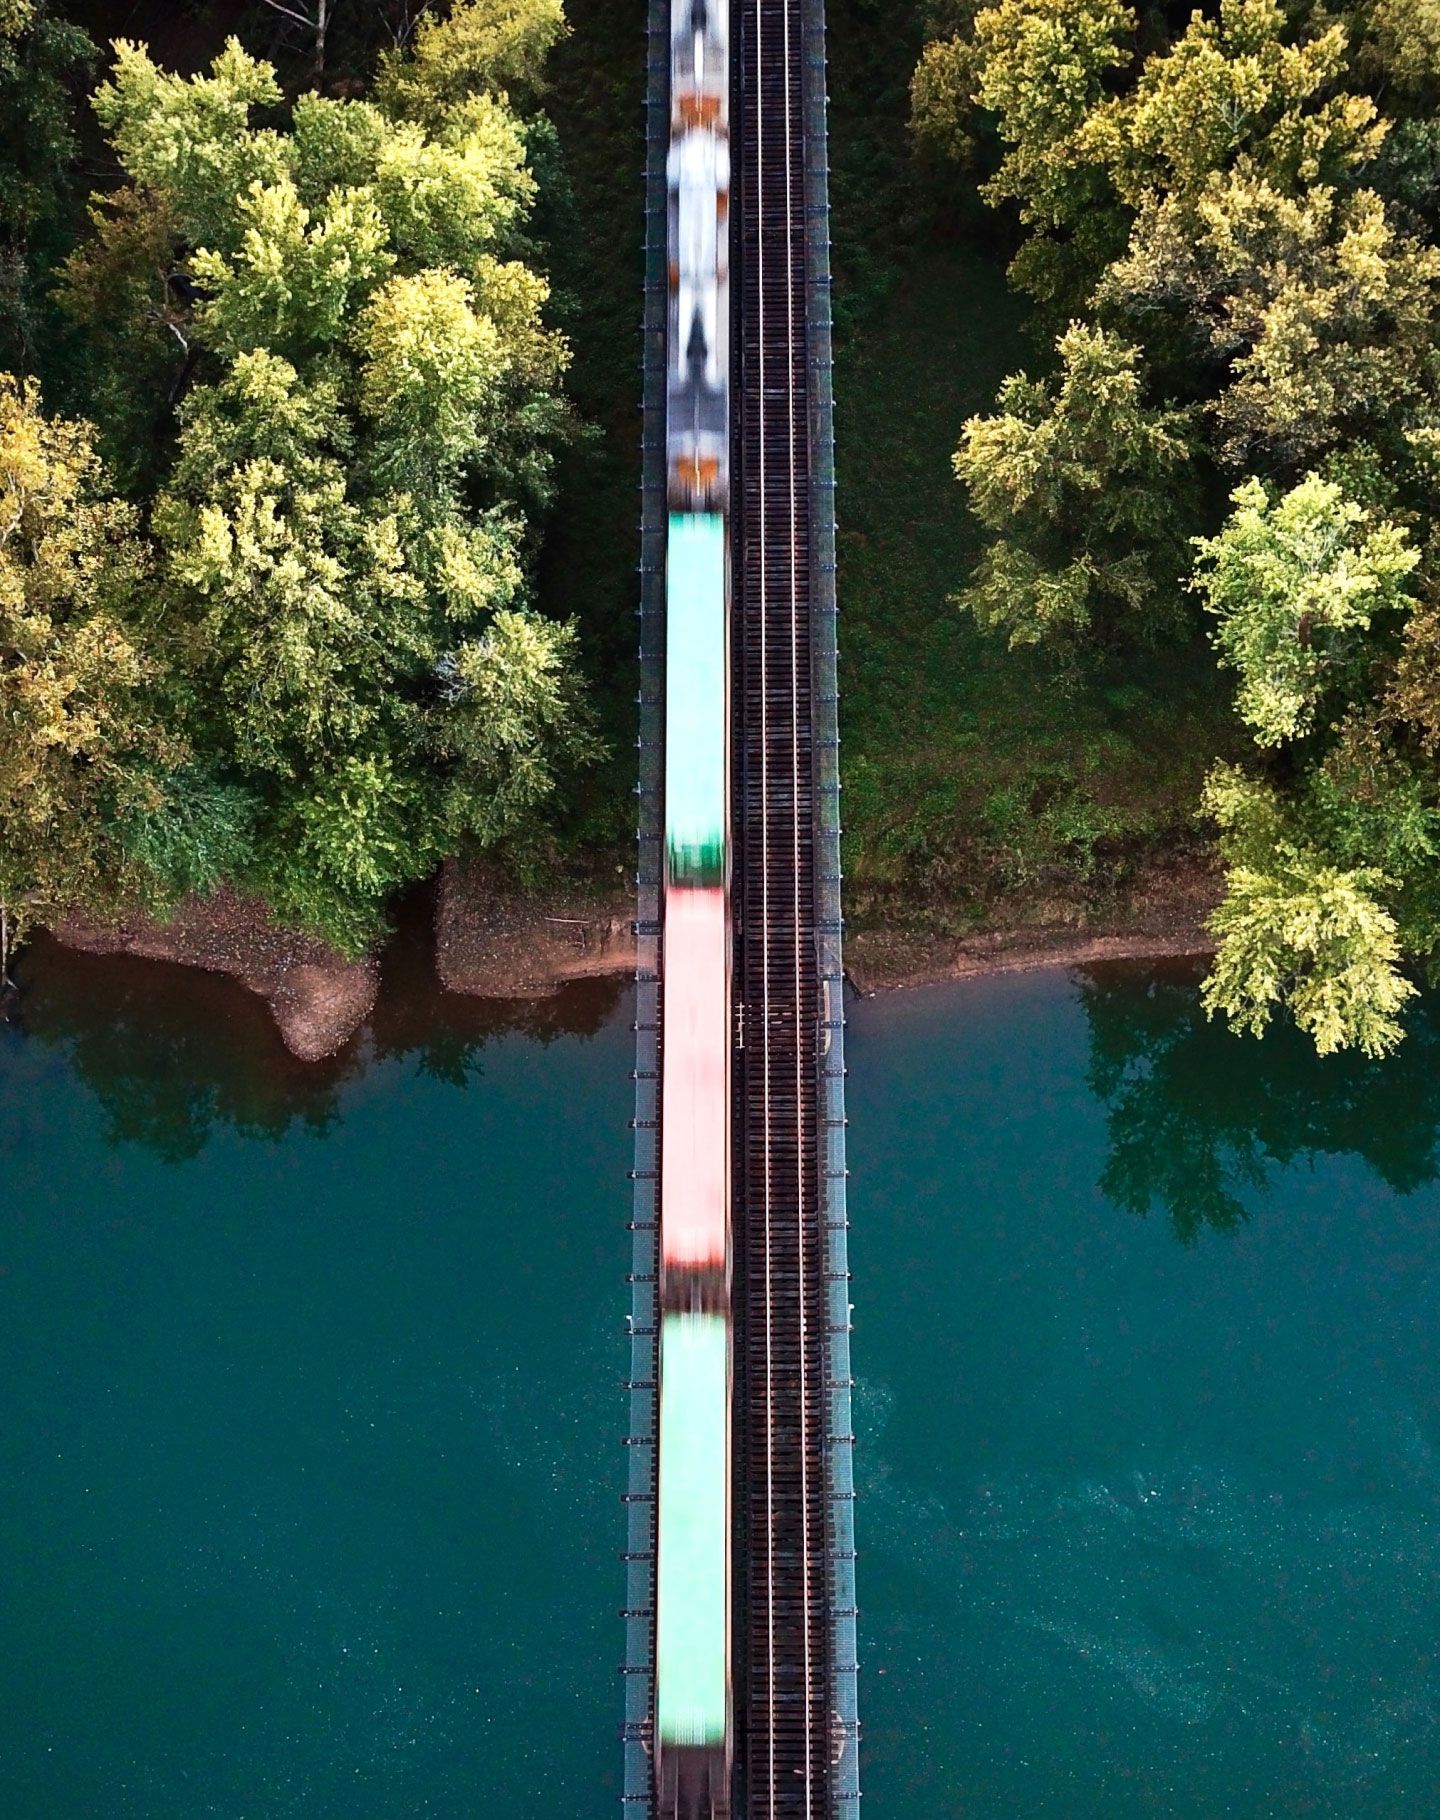 Cargo train crossing bridge over water and land.